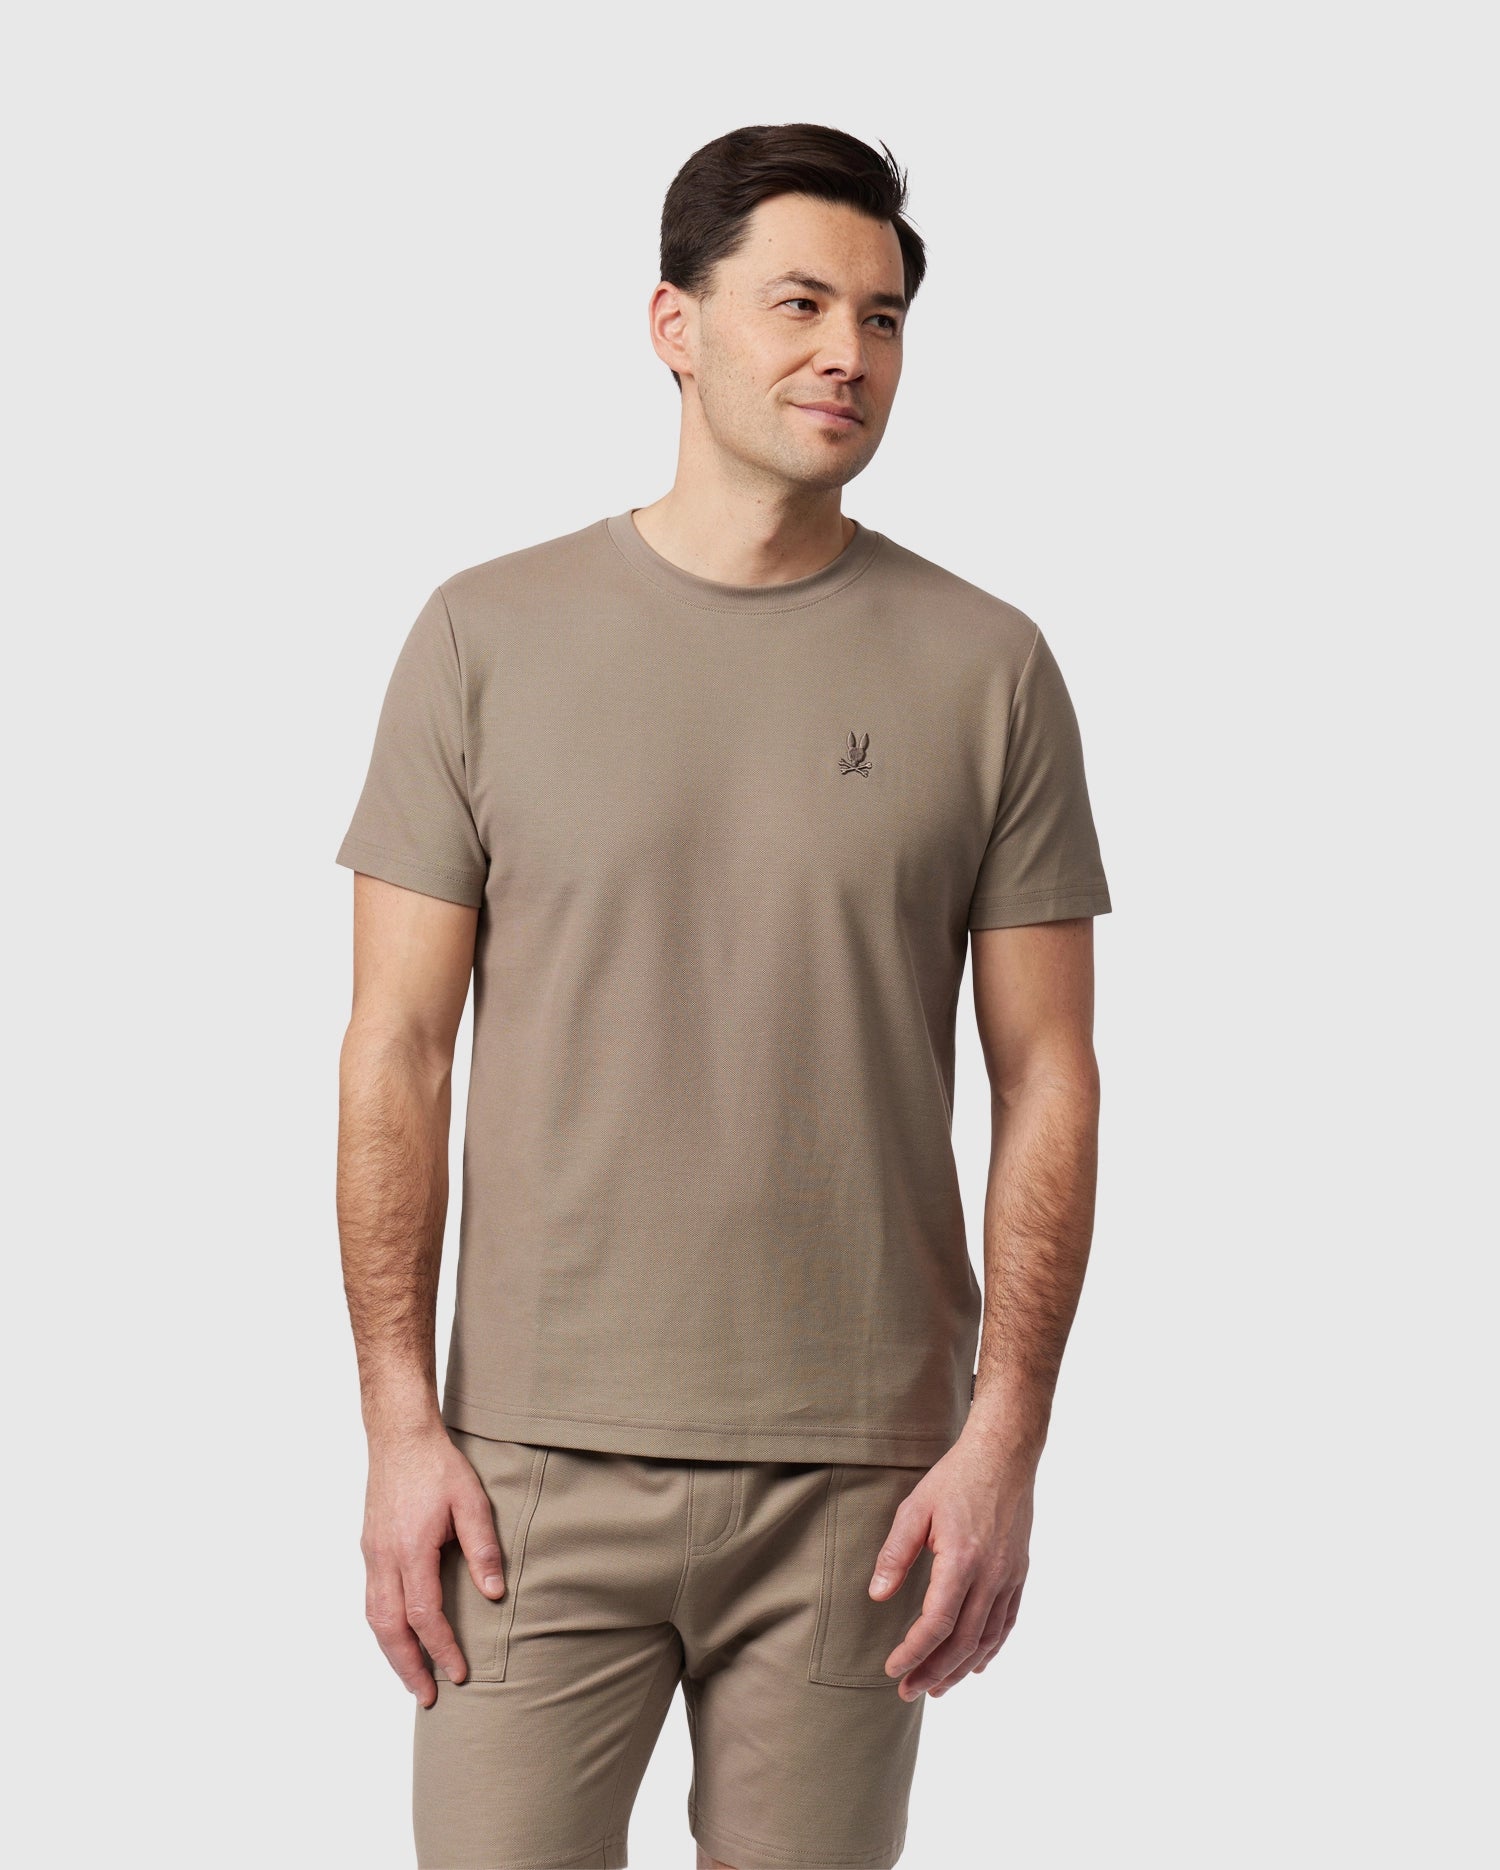 A man with short dark hair is standing against a plain white background. He is wearing a beige Men's Stanford Pique Tee - B6U340B200 by Psycho Bunny made of diamond-knit Pima cotton, featuring a small, dark plant logo on the left side of his chest, and matching beige pants. He has a neutral expression and his arms are relaxed by his sides.